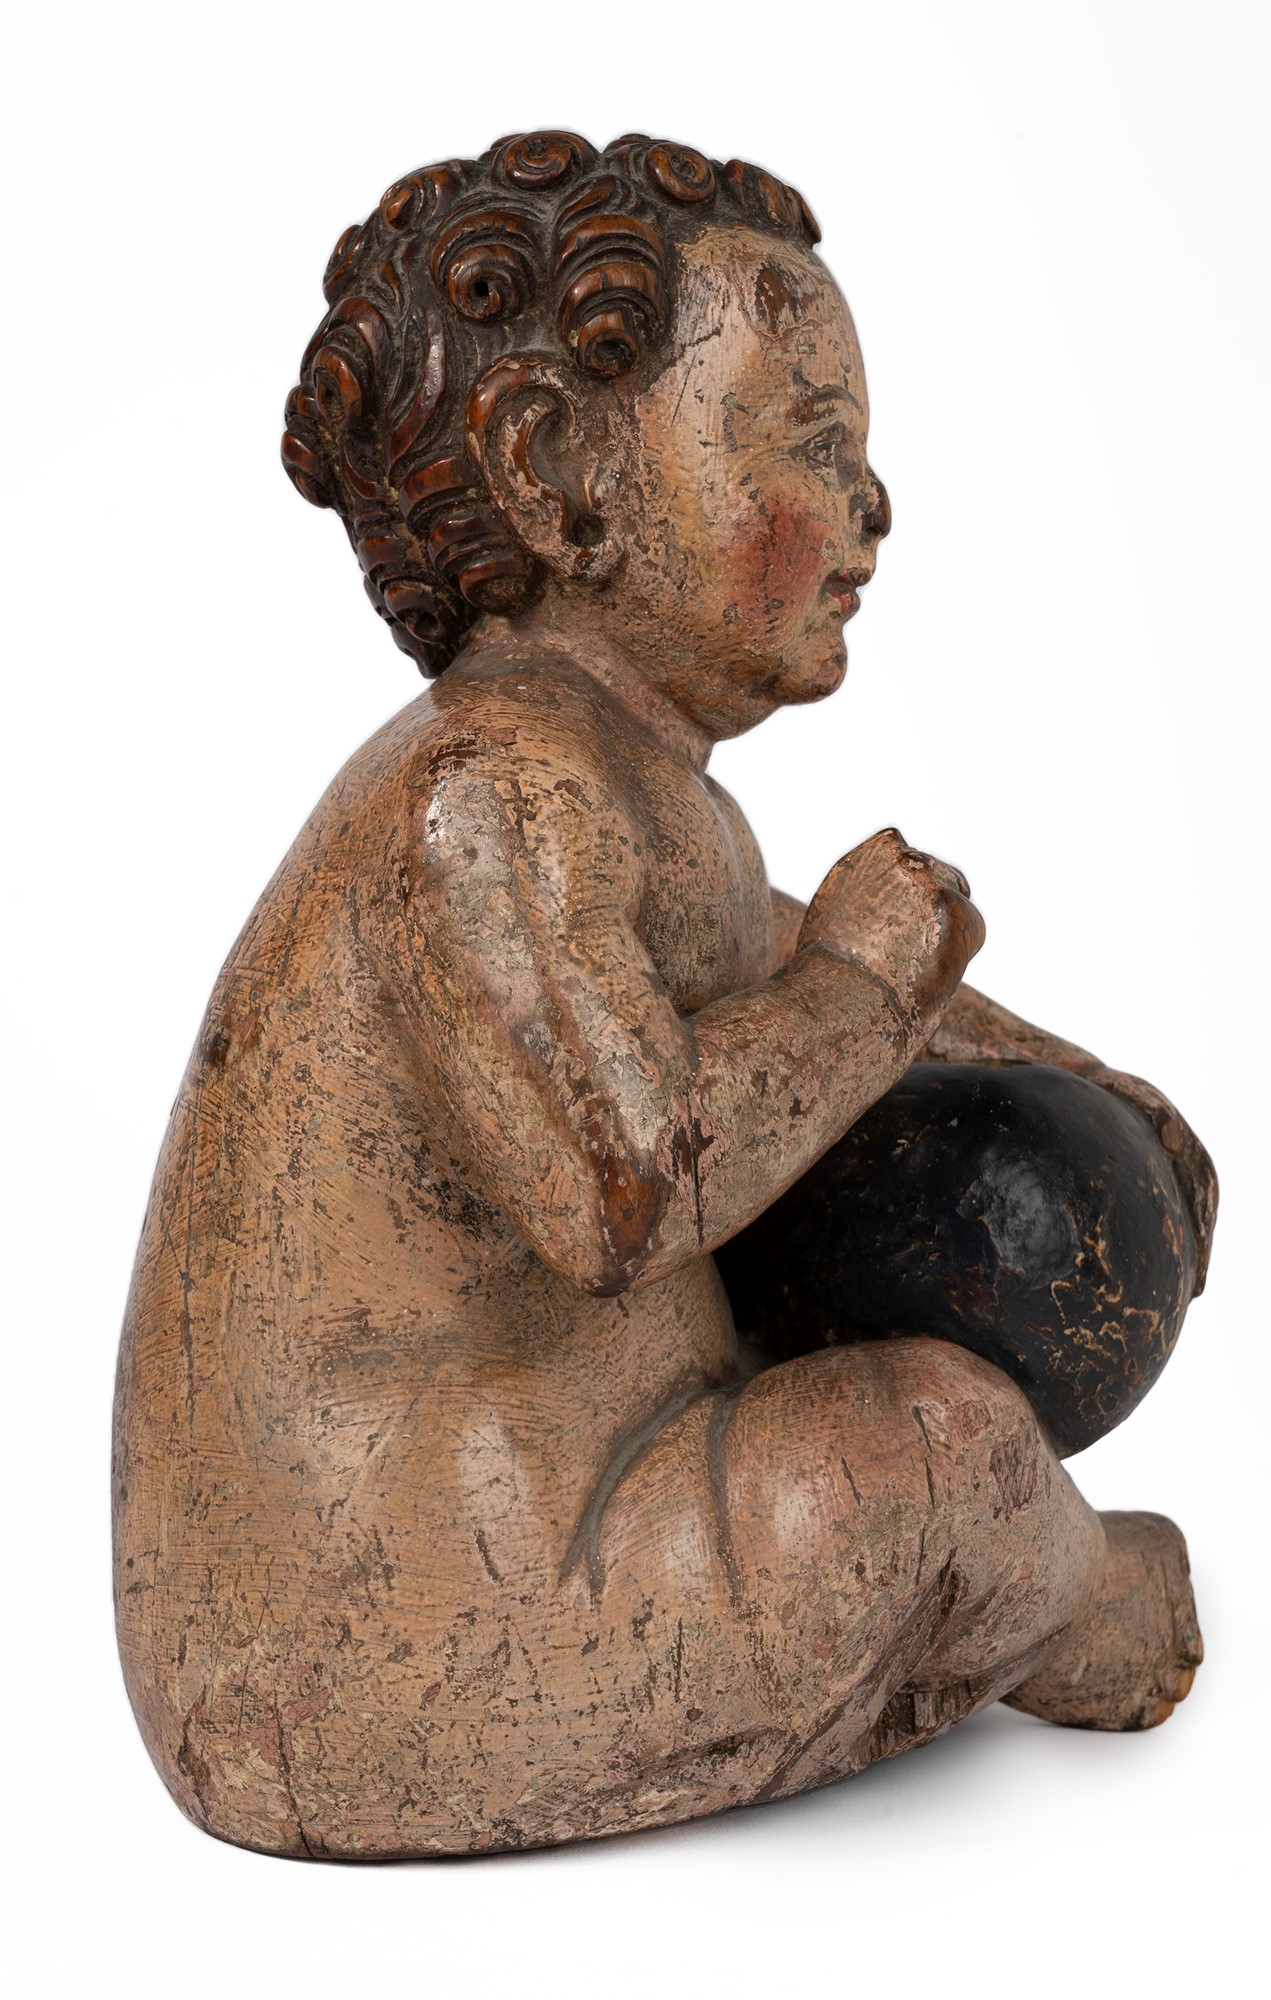 Polychrome wooden sculpture representing Baby Jesus with globe, 17th century - Image 2 of 6